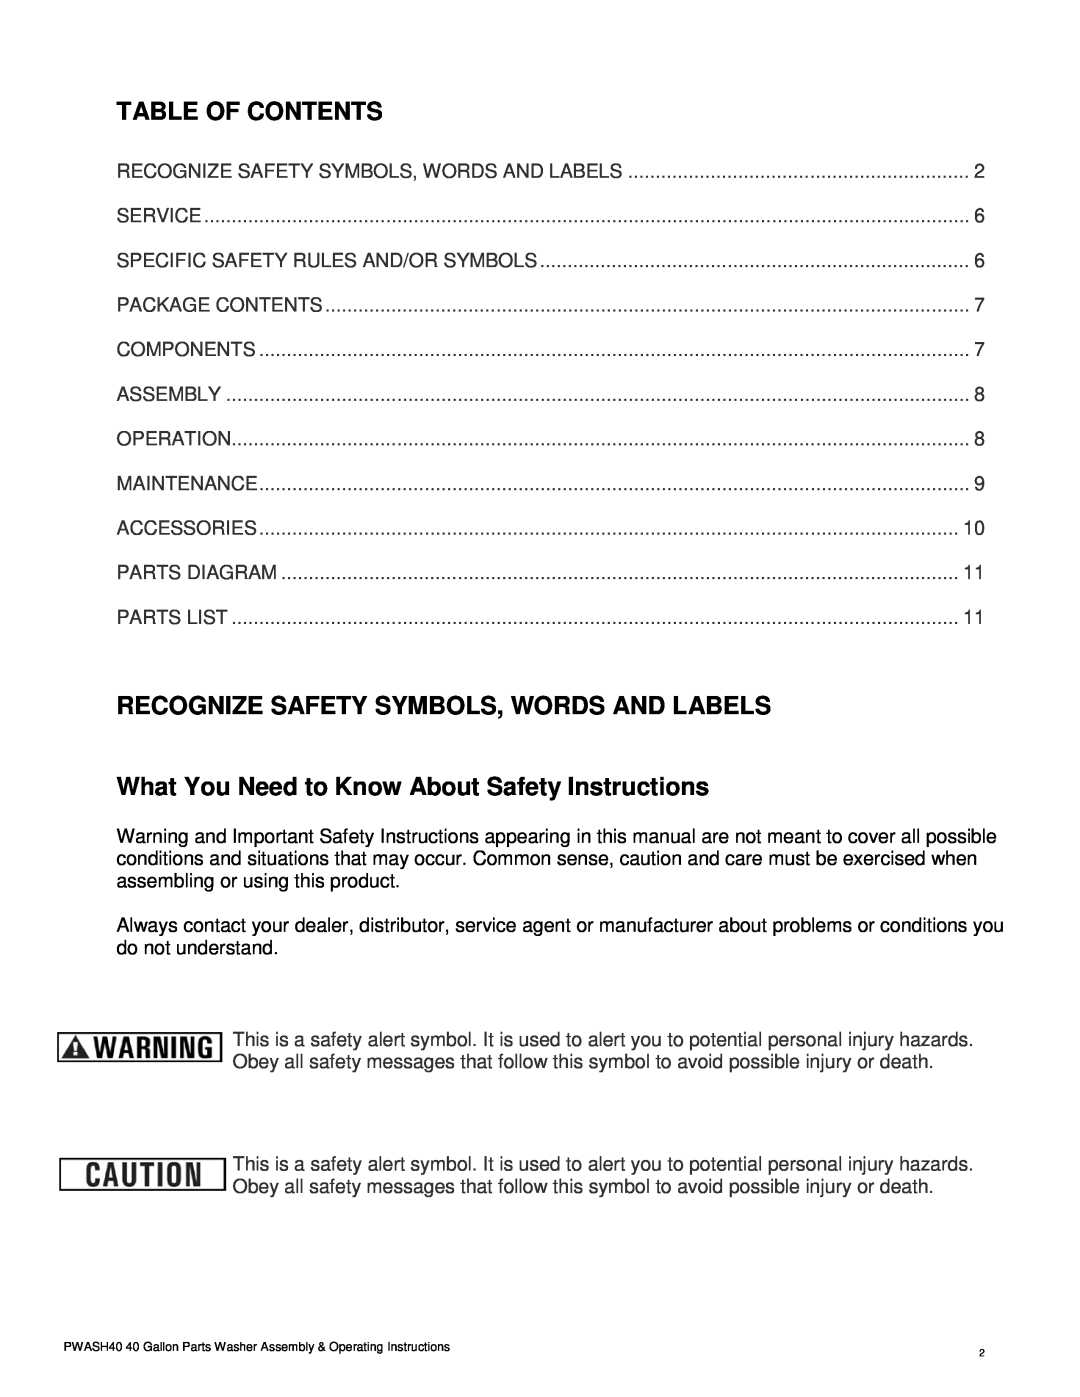 Buffalo Technology PWASH40201407 warranty Table Of Contents, Recognize Safety Symbols, Words And Labels 